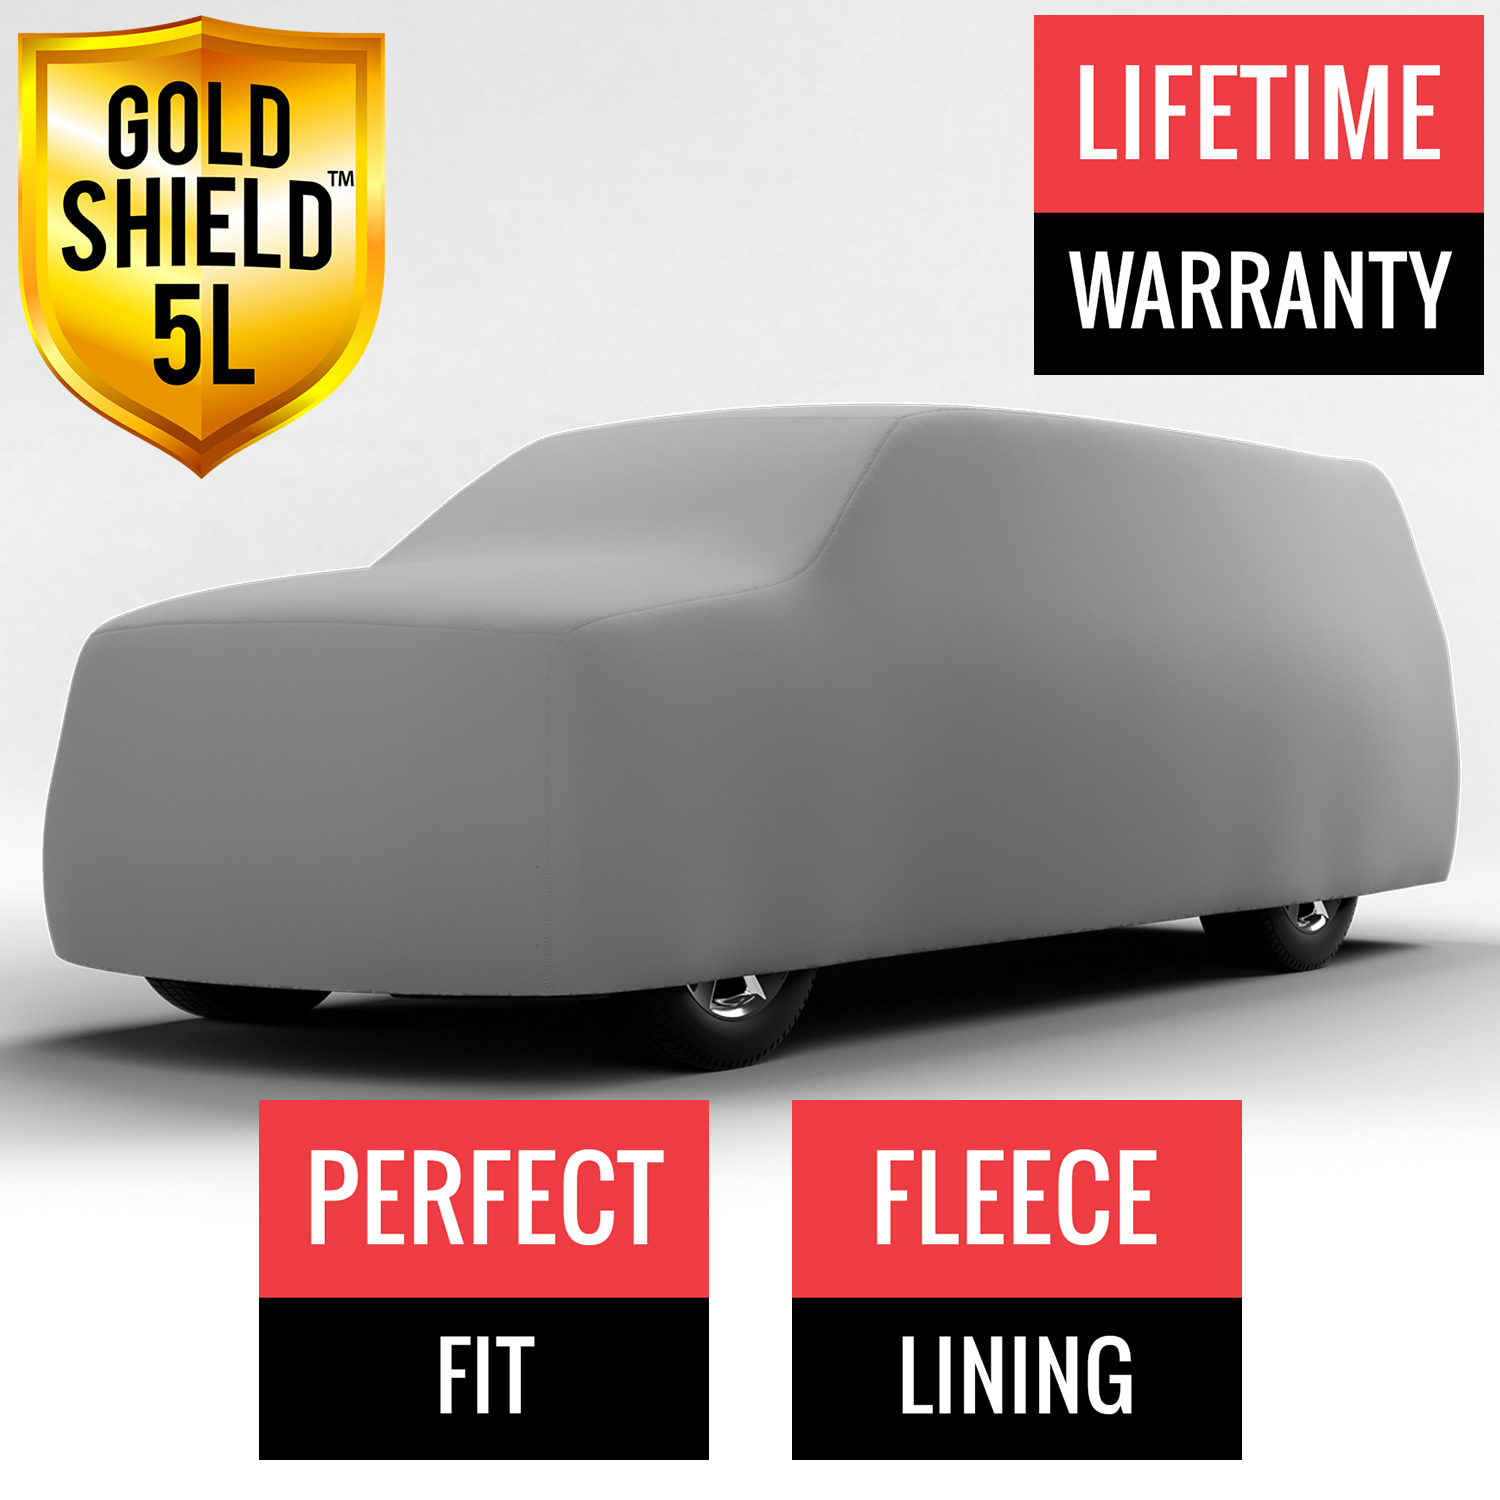 Gold Shield 5L - Car Cover for GMC C25 Pickup 1972 Extended Cab Pickup 8.0 Feet Bed with Camper Shell